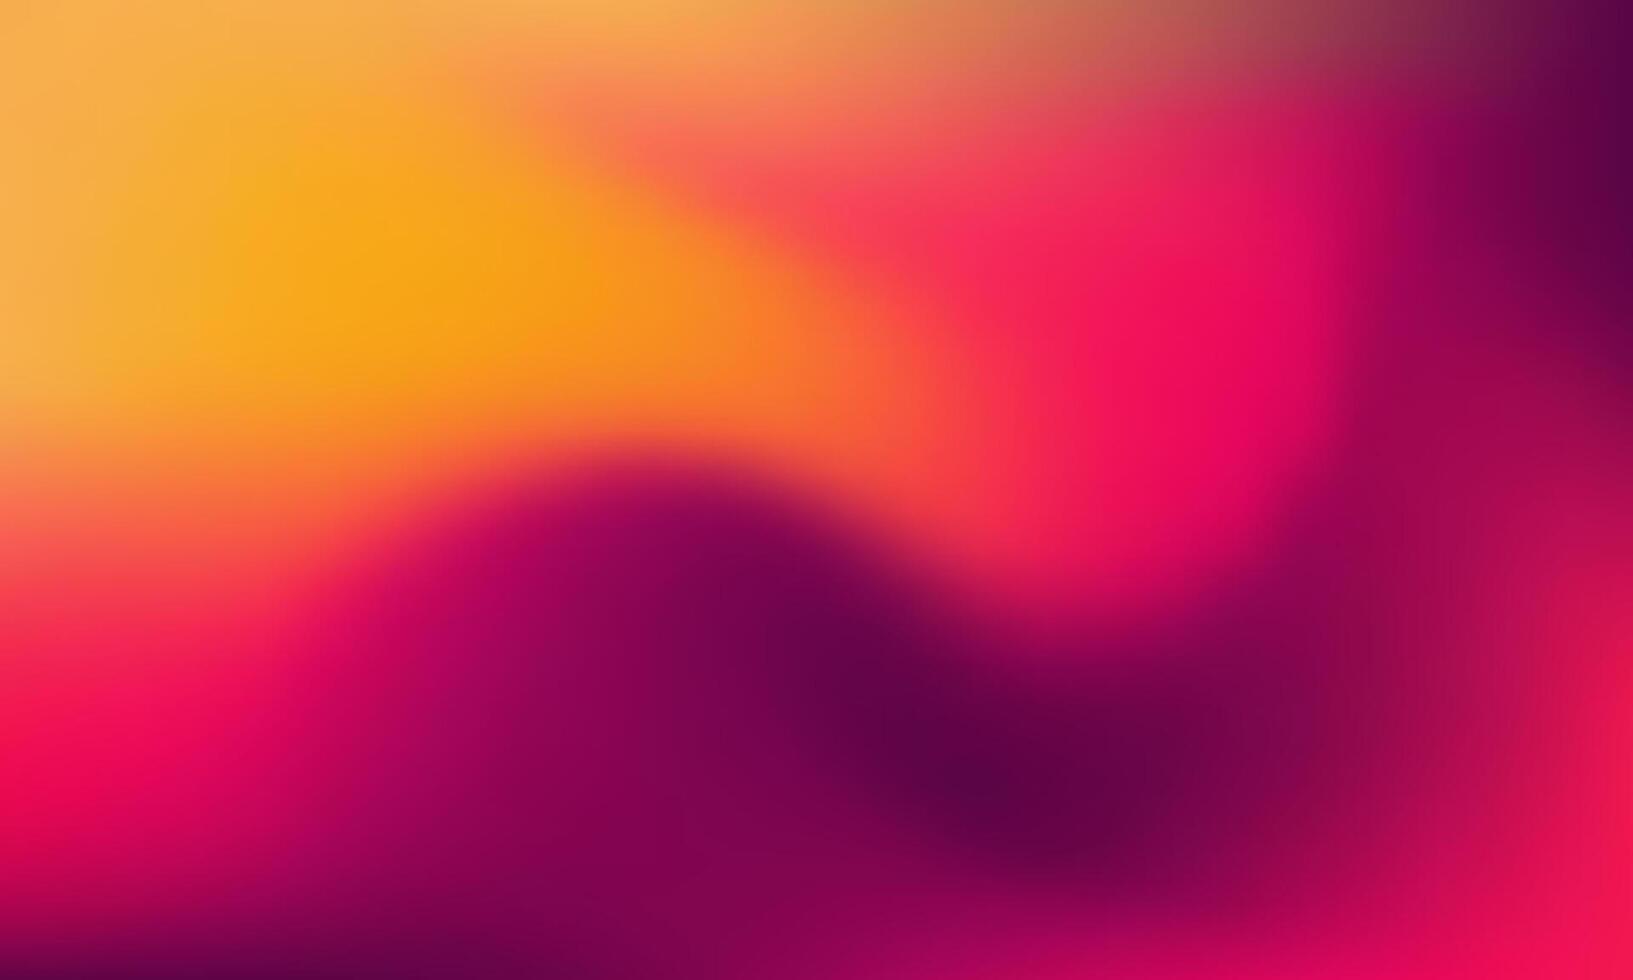 Abstract Gradient Texture Design with Grainy Elements vector